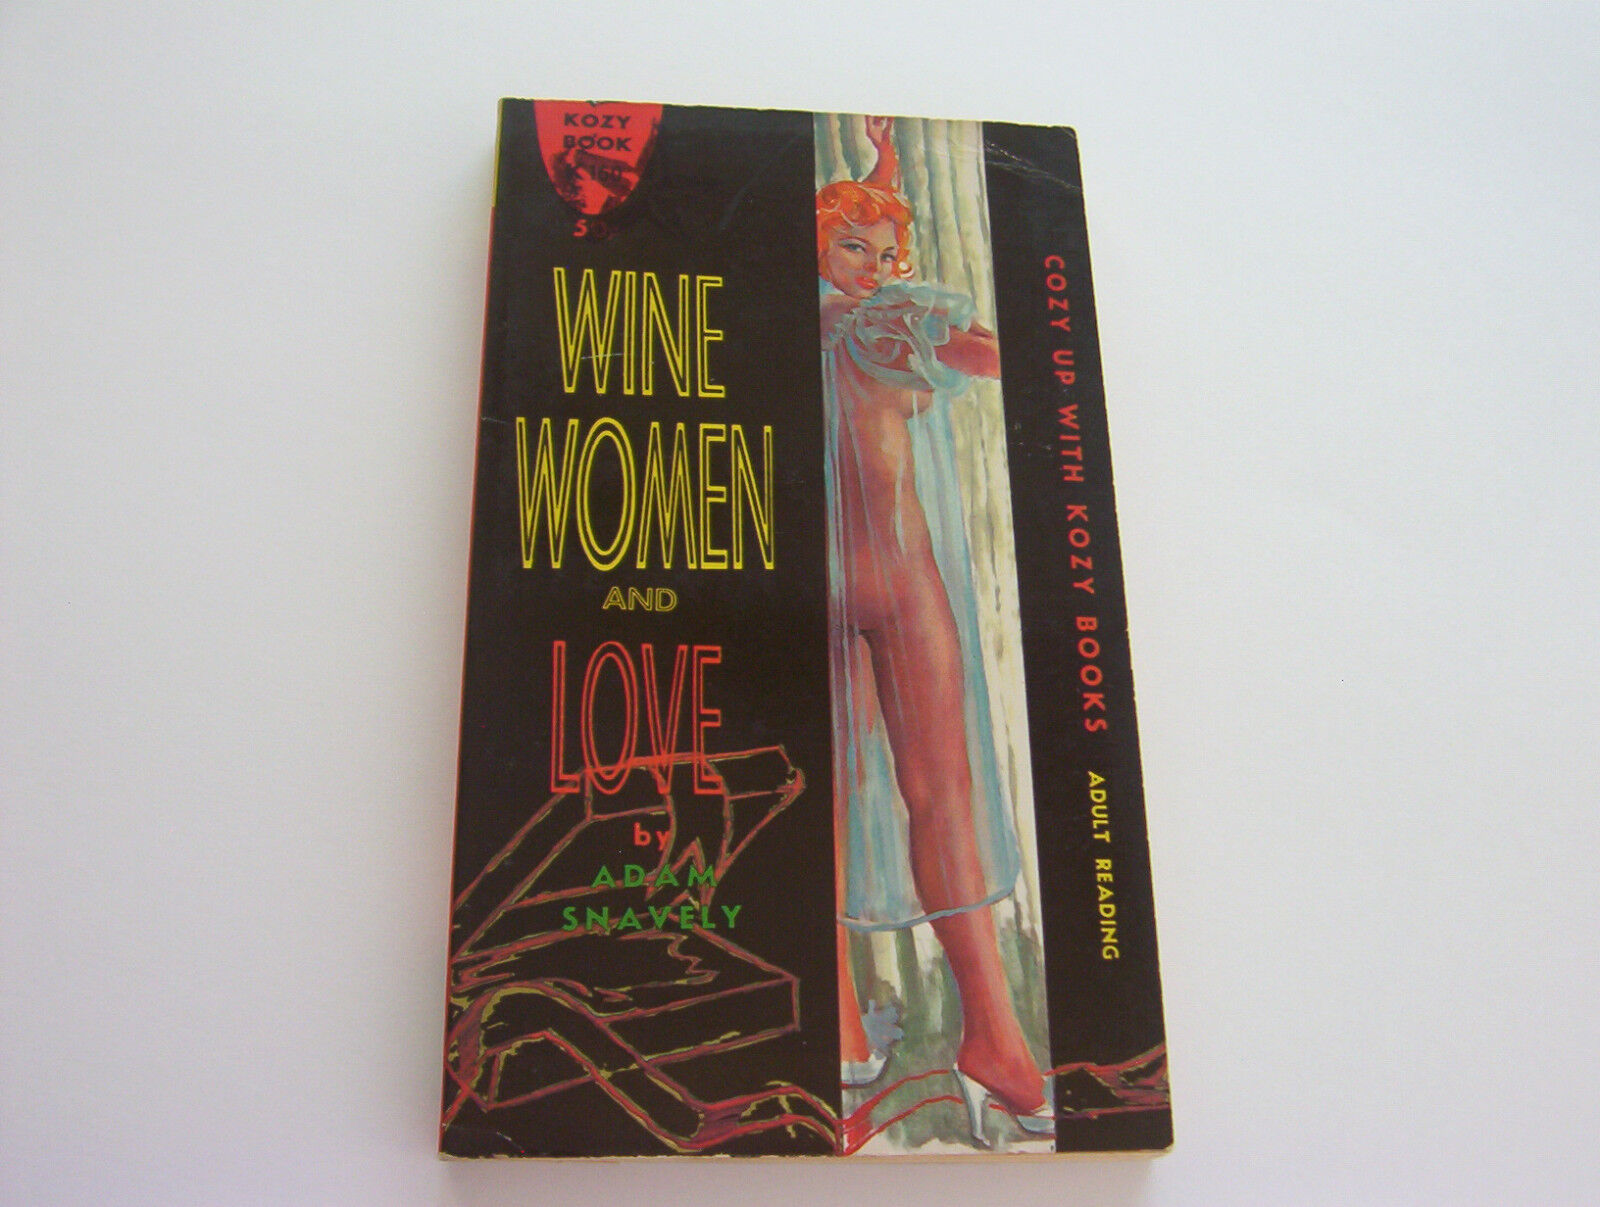 WINE, WOMEN AND LOVE  1962  ADAM SNAVELY  STUNNING NUDE COVER ART  VERY GOOD+